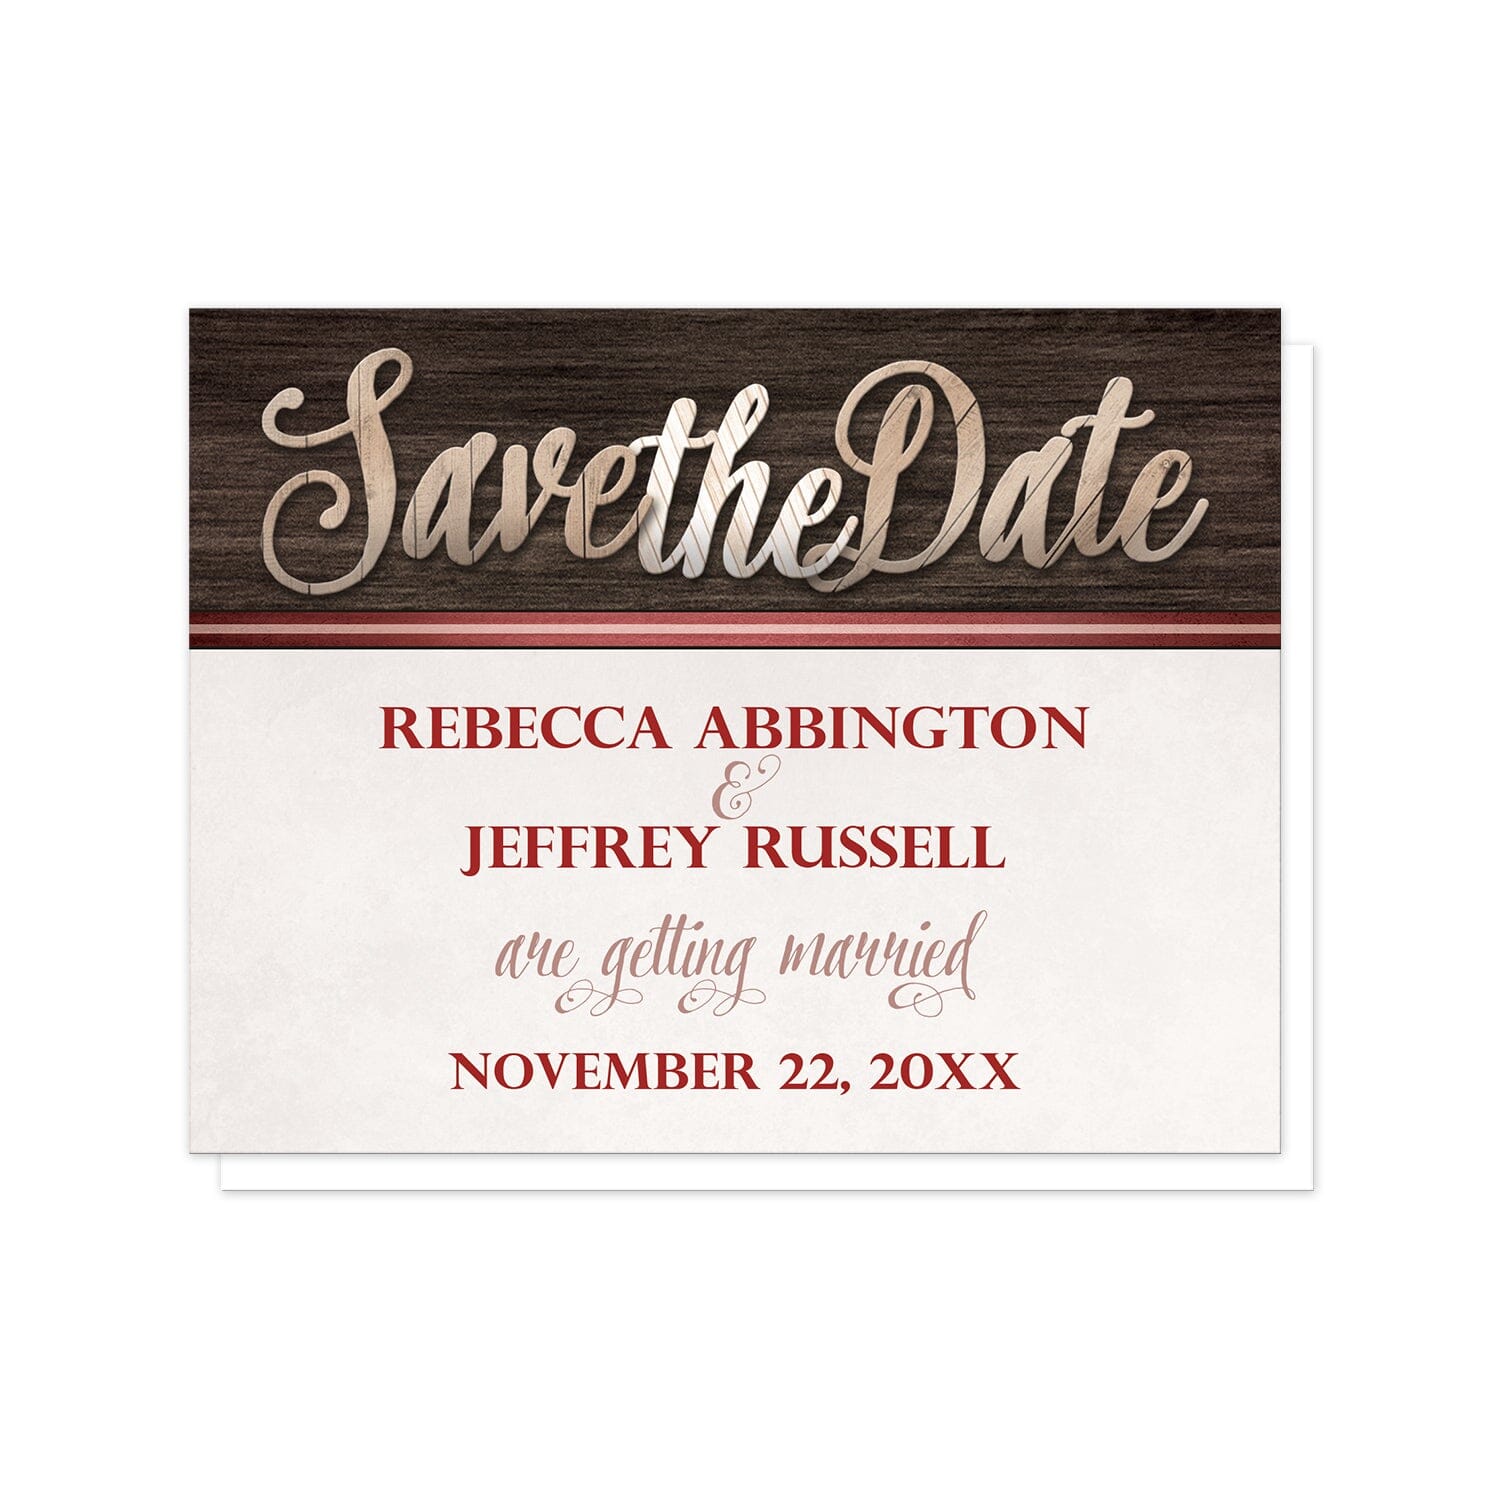 Rustic Wood Lettering with Red Save the Date Cards at Artistically Invited. Rustic wood lettering with red save the date cards designed with "Save the Date" in a wooden letters illustration over a dark wood background along the top. Your personalized wedding date details are custom printed in red and light brown over a beige background below the wooden letter illustration. 